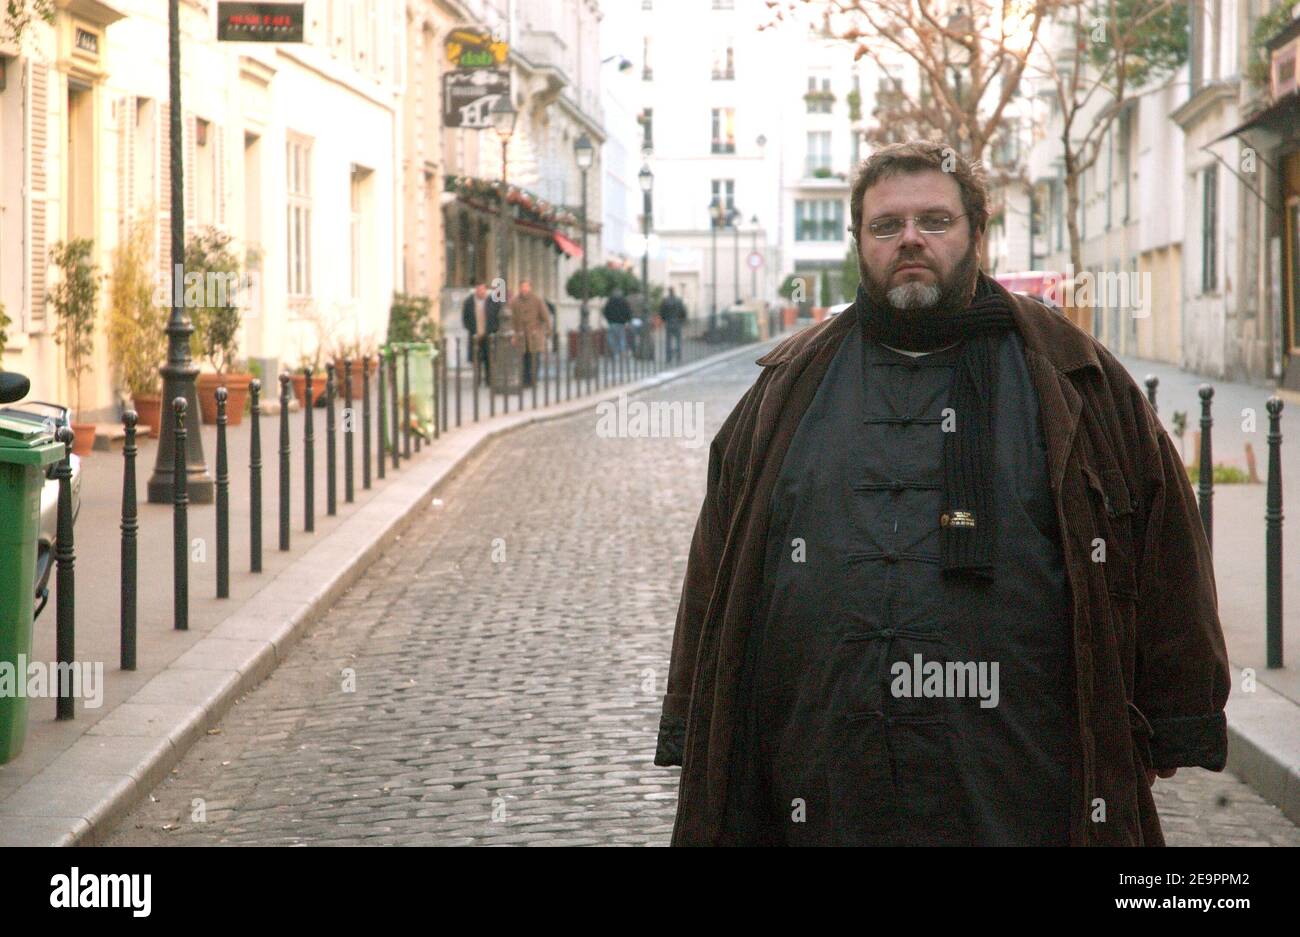 Jean-Jacques Jauffret, 41, is pictured around 'Passage Brady' an Indian  neighborhood in Paris, France on December 20, 2006. In 2005, Jean-Jacques  Jauffret was obliged to pay a 500 Euros fee for a